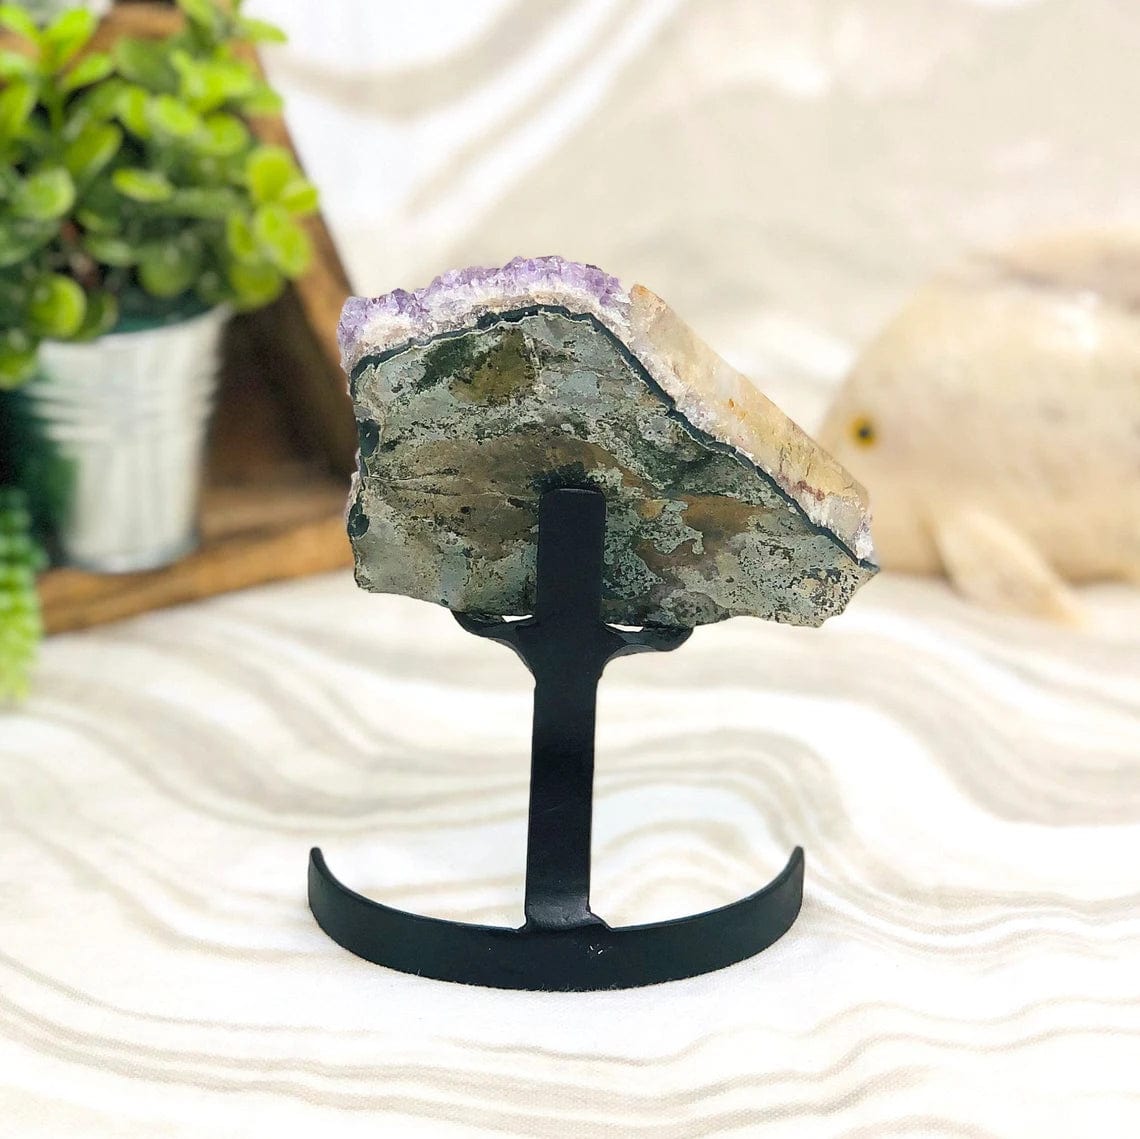 Amethyst Crystal Purple Geode With Calcite on Metal Stand from back view